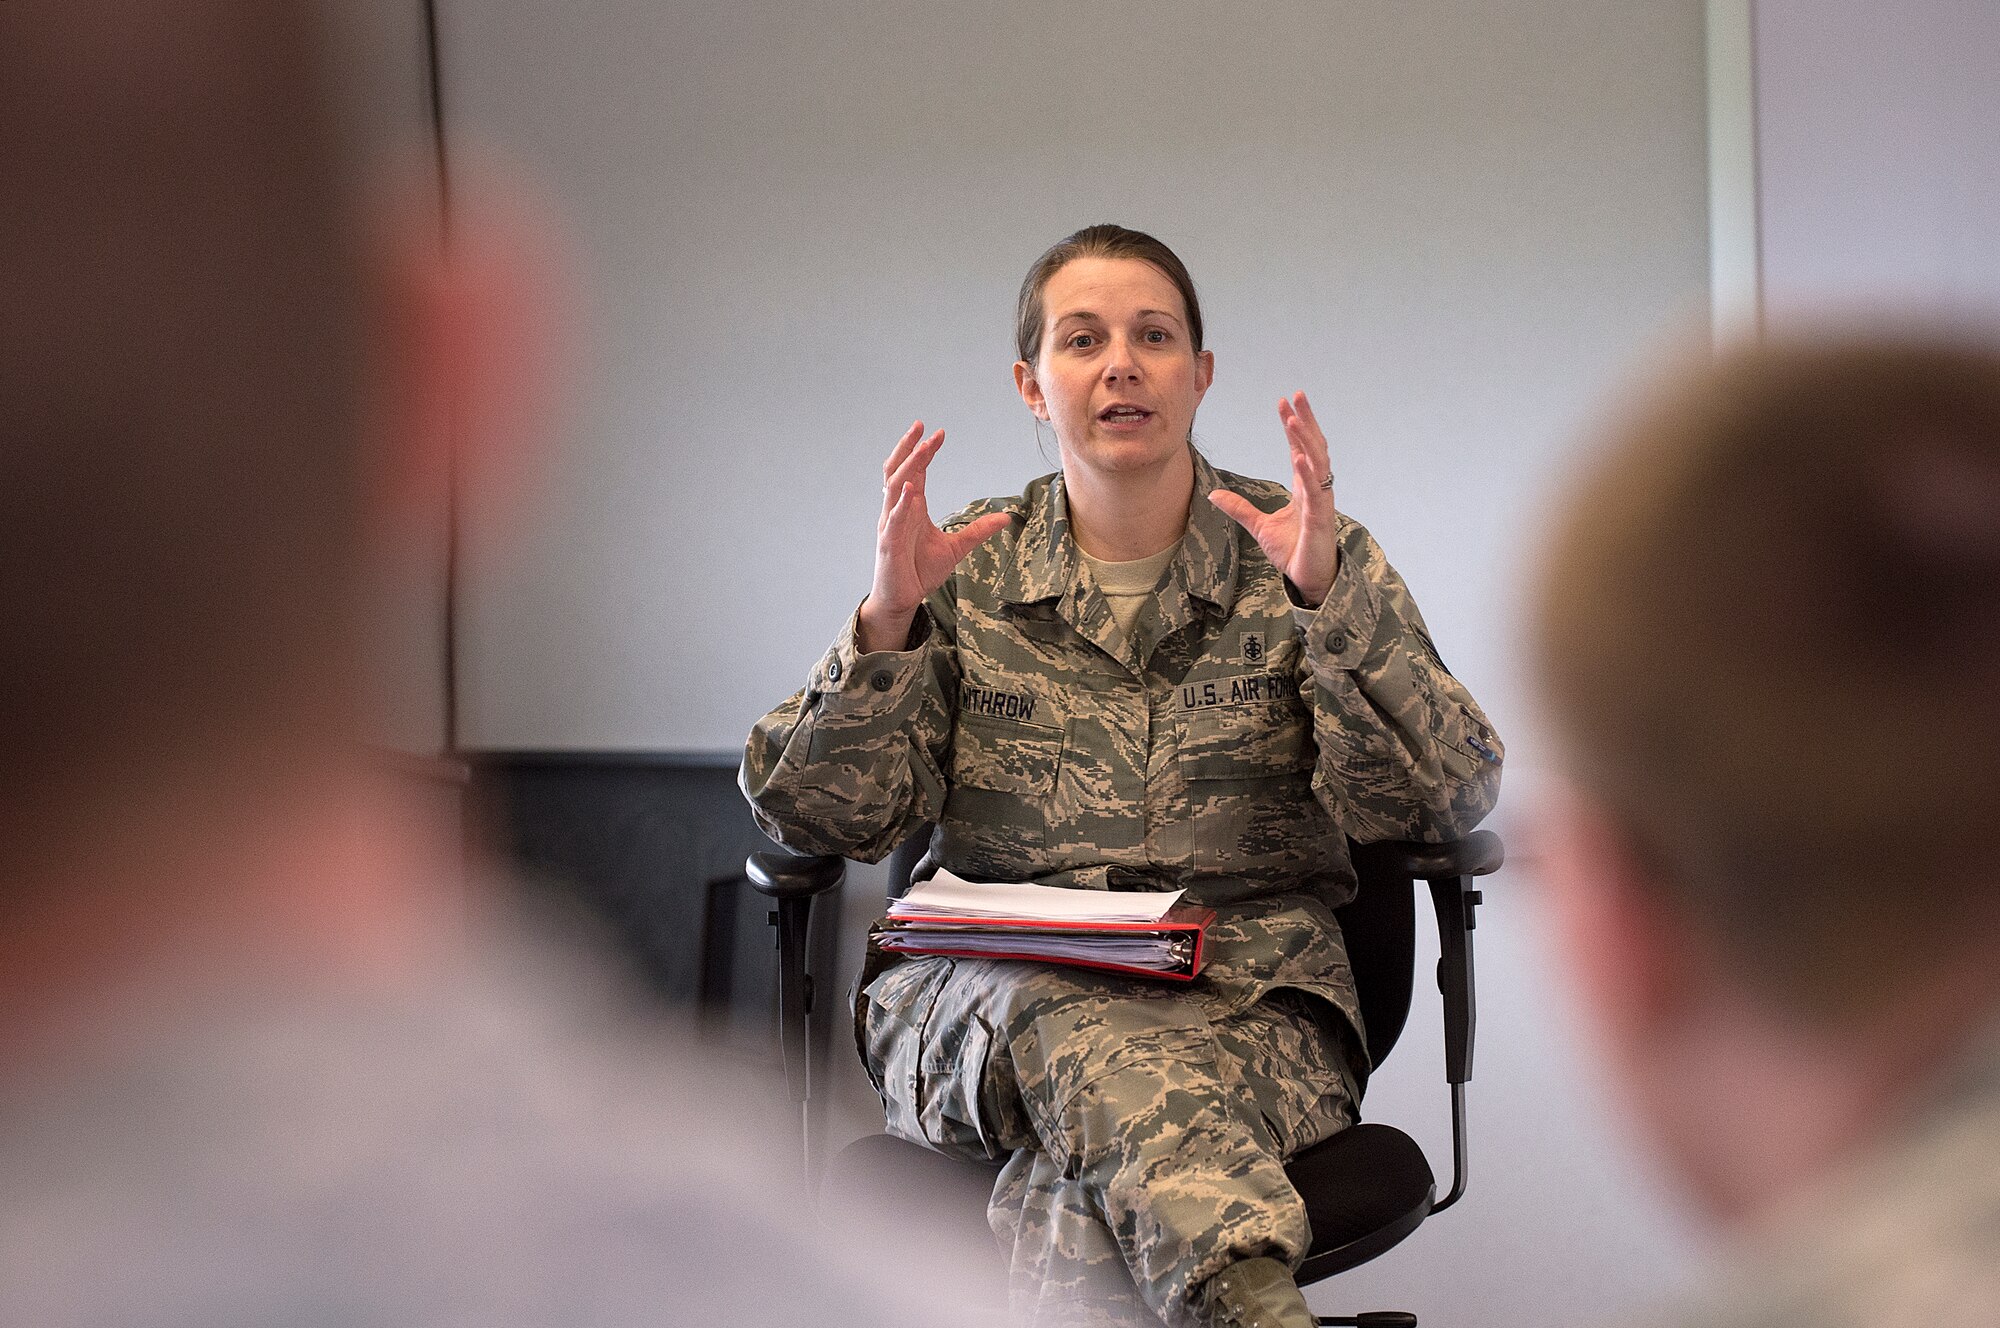 Tech Sgt. Sarah Withrow, 90th Force Support Squadron Airman Leadership School instructor, teaches her class June 15, 2015, on F.E. Warren Air Force Base, Wyo. The Warren ALS earned a perfect score on a recent program management review conducted by its accreditation board. (U.S. Air Force photo by R.J. Oriez)